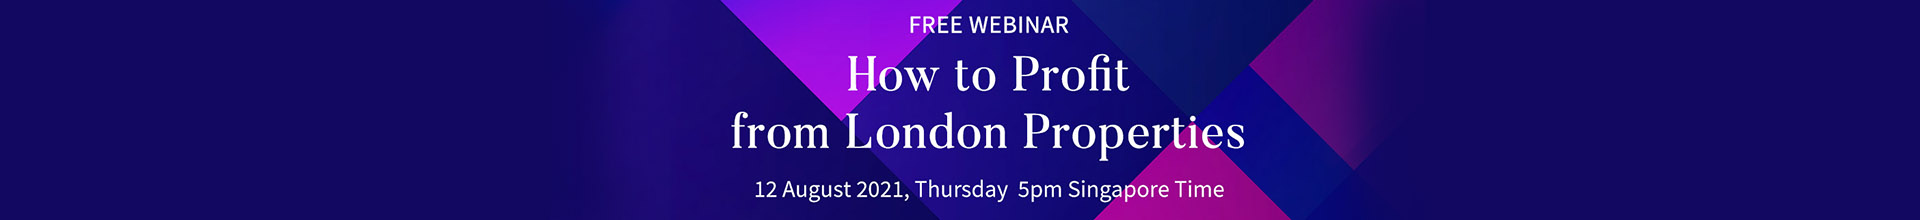 How to Profit from London Properties